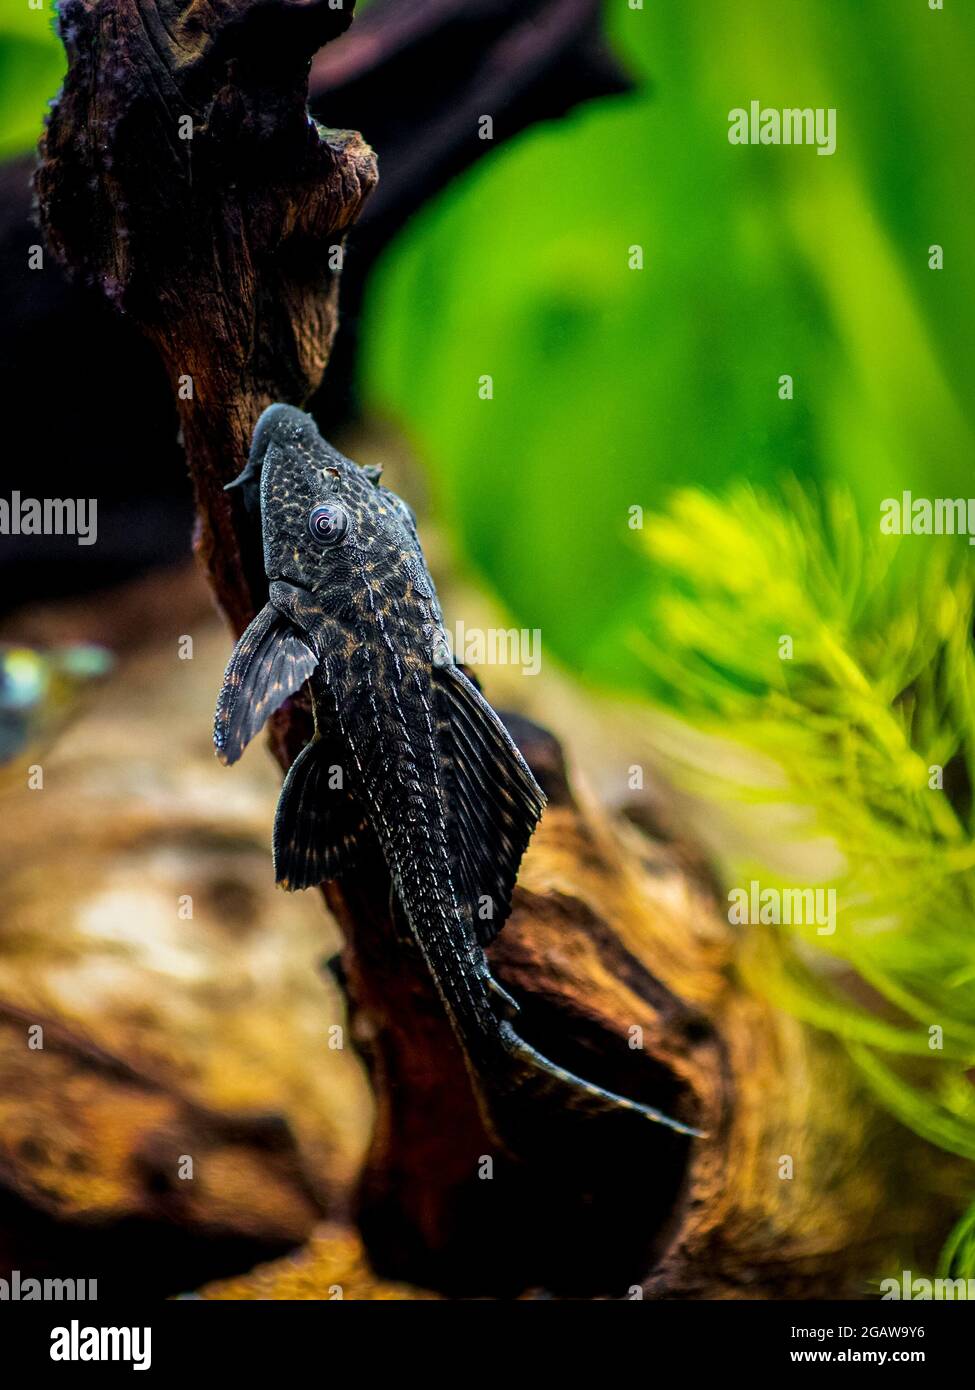 suckermouth catfish or common pleco (Hypostomus plecostomus) isolated in a fish tank with blurred background Stock Photo